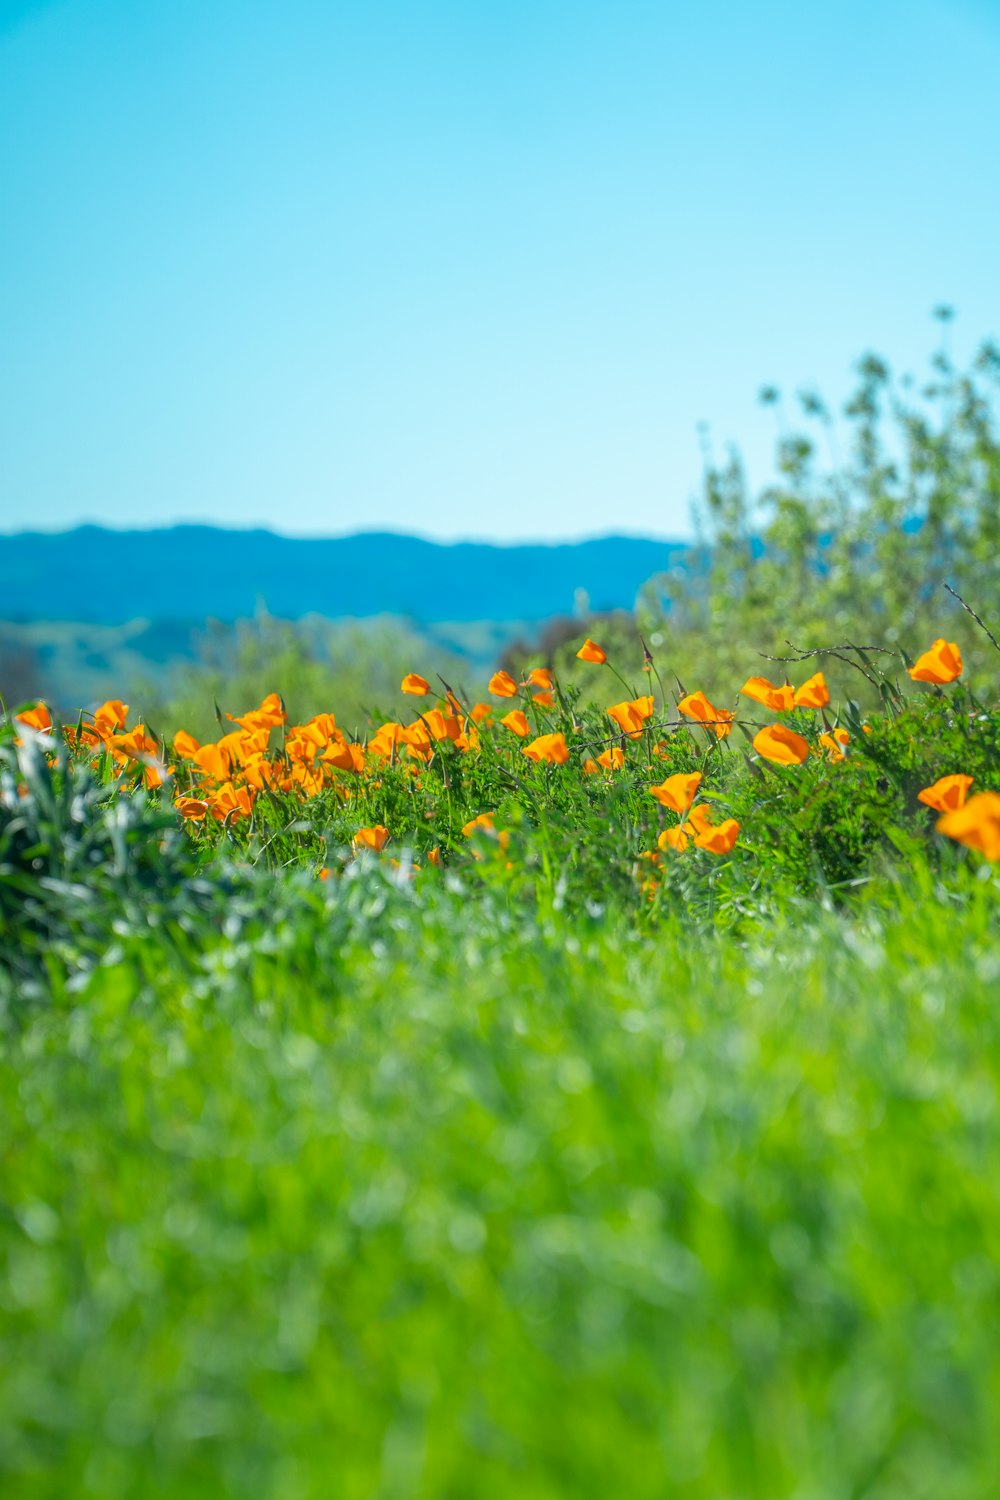 a field full of orange flowers on a sunny day